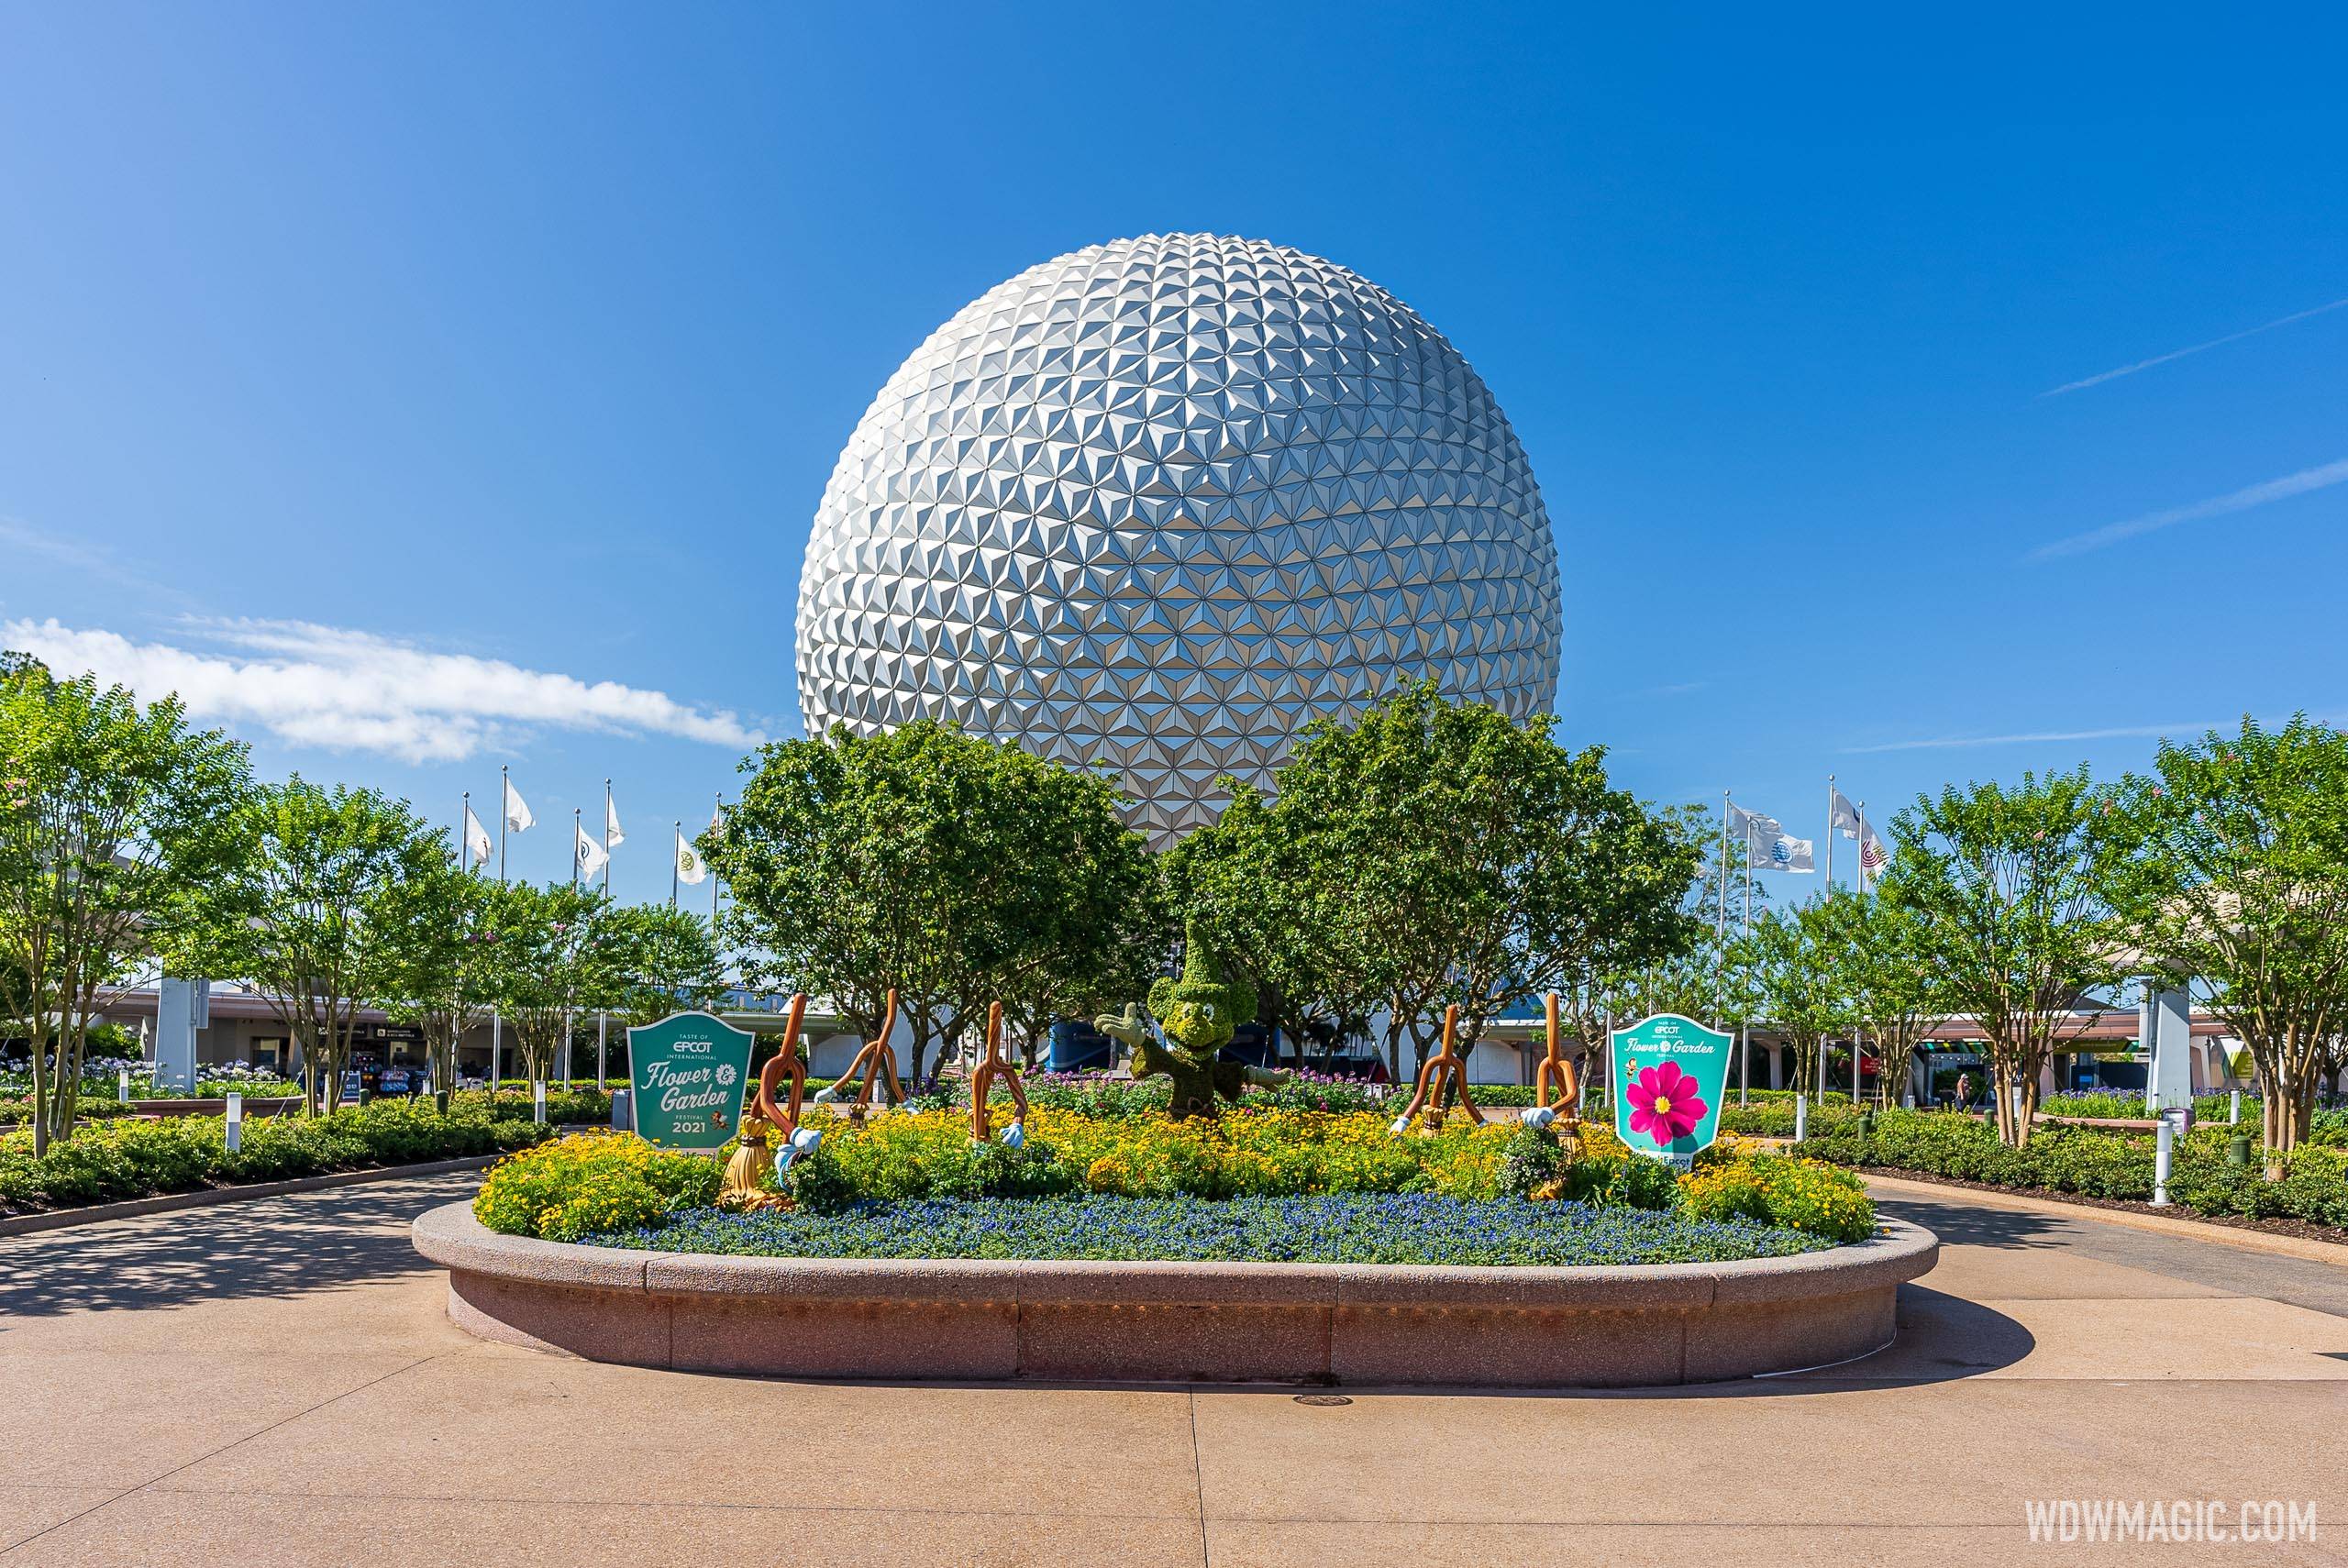 Walt Disney World theme parks will reopen after being briefly closed due to Hurricane Nicole